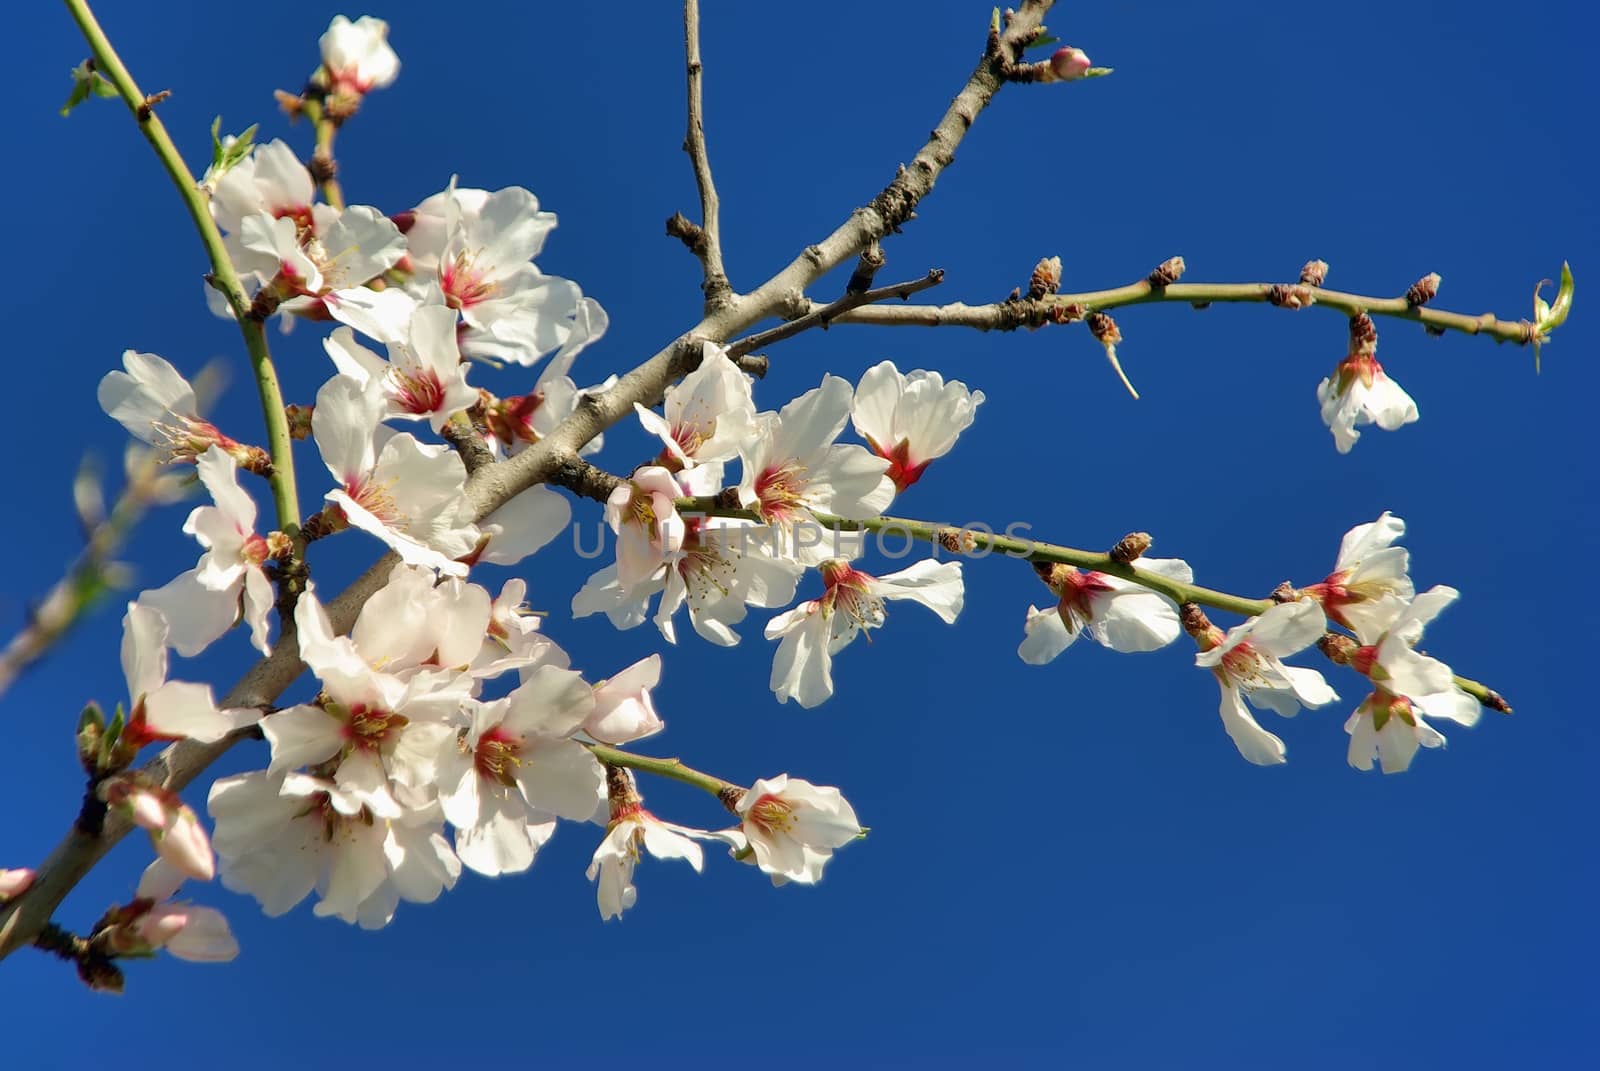 Typical White Almond Flowers at winter in Majorca